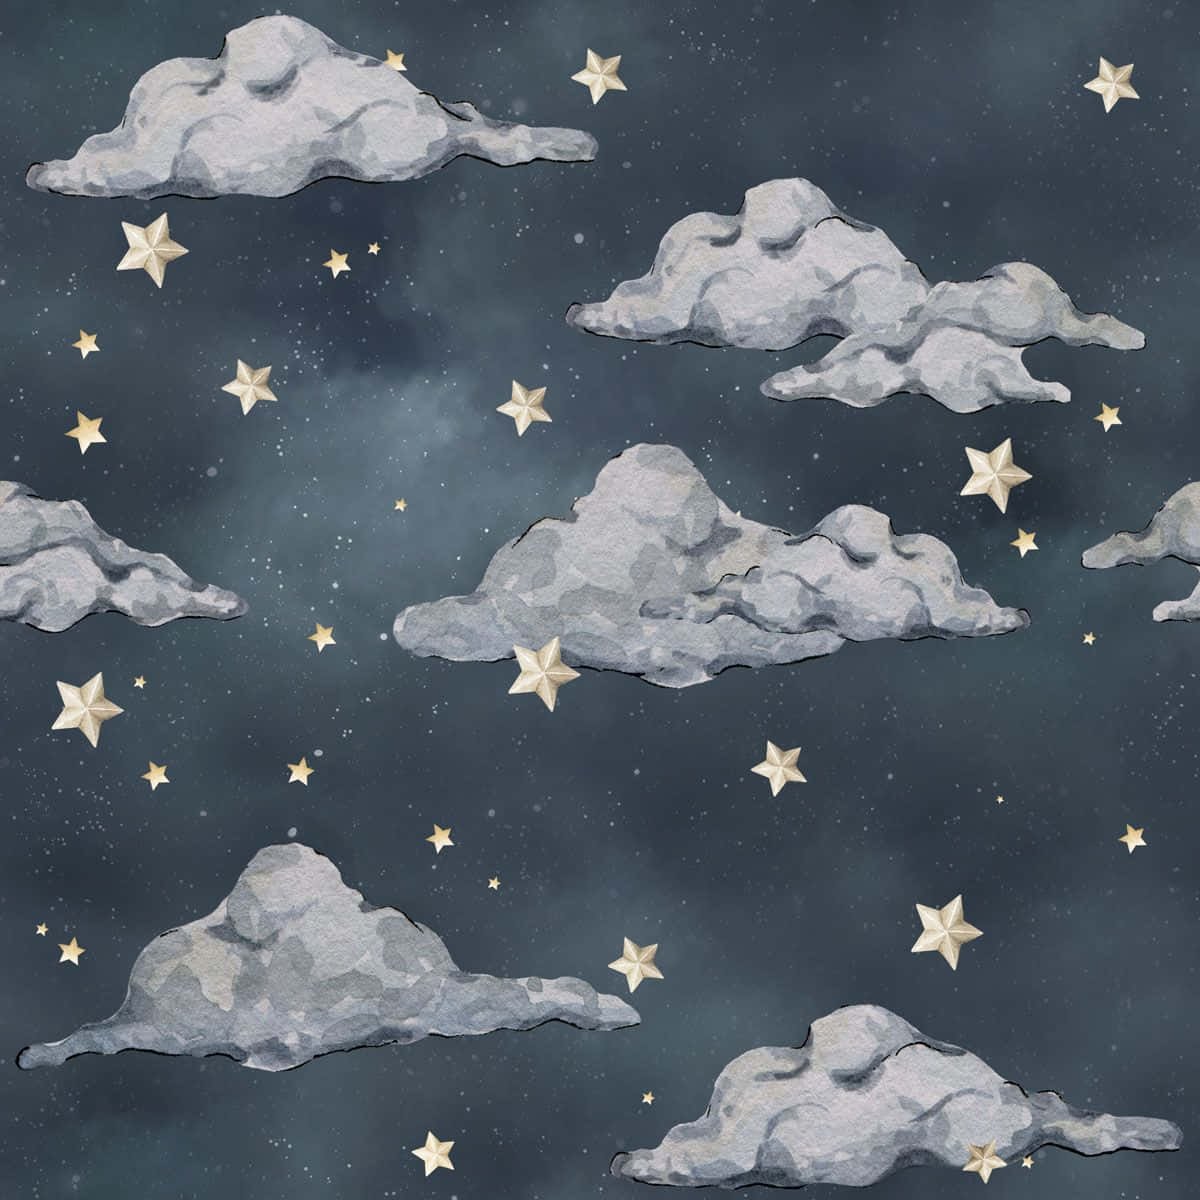 Magical Night Sky With Shining Stars And White Clouds Wallpaper